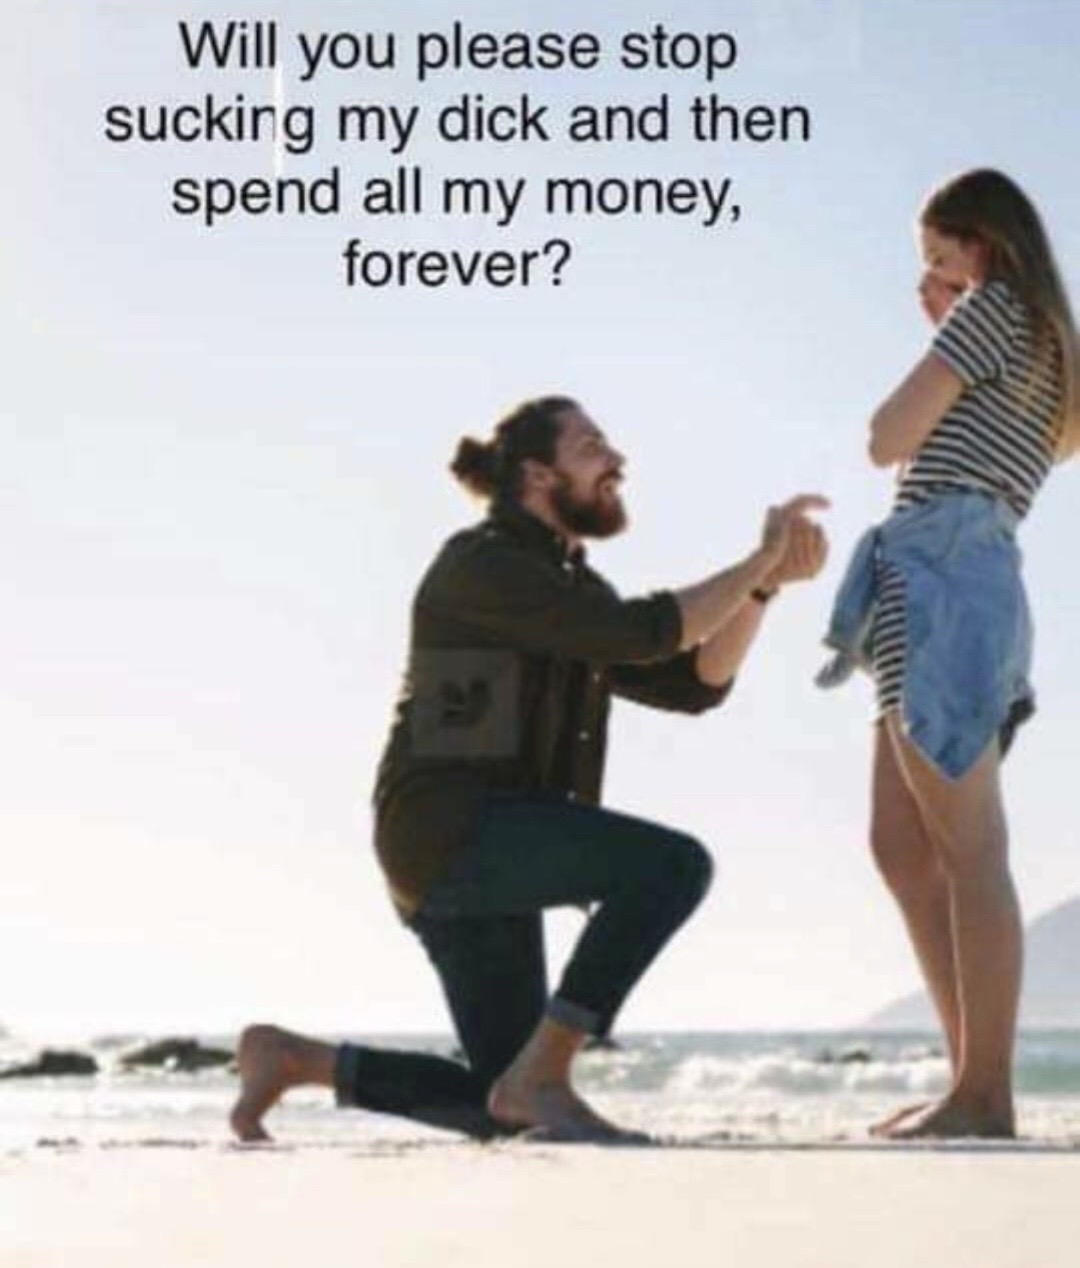 man proposing to women - Will you please stop sucking my dick and then spend all my money, forever?